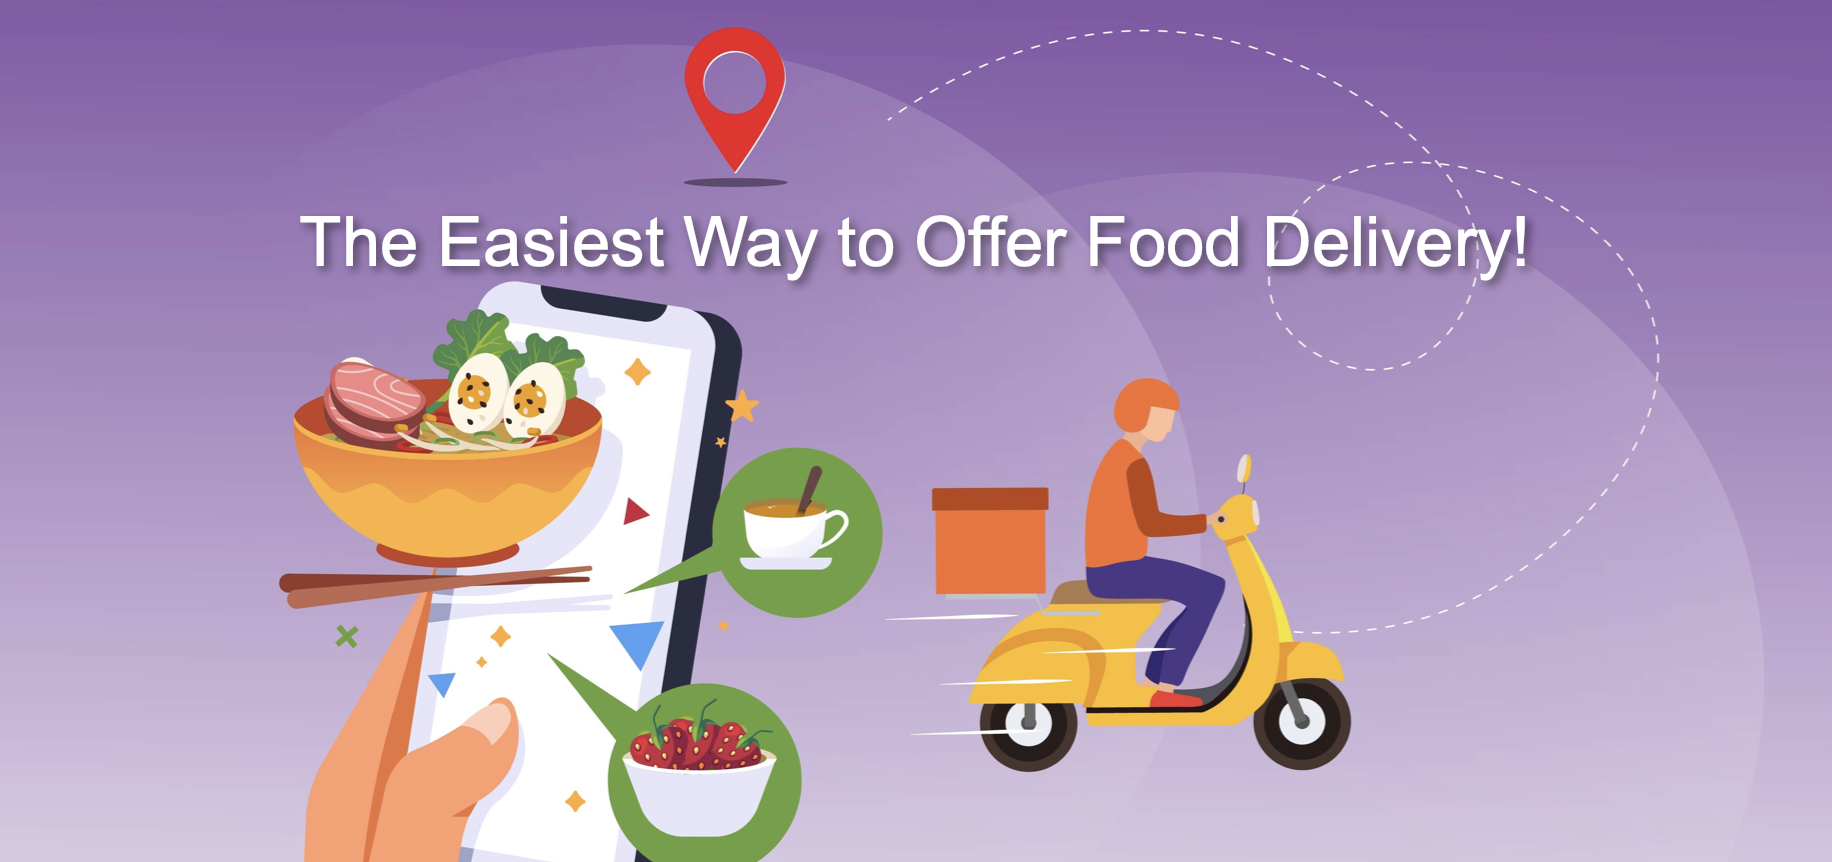 The easiest way for restaurants to offer food delivery